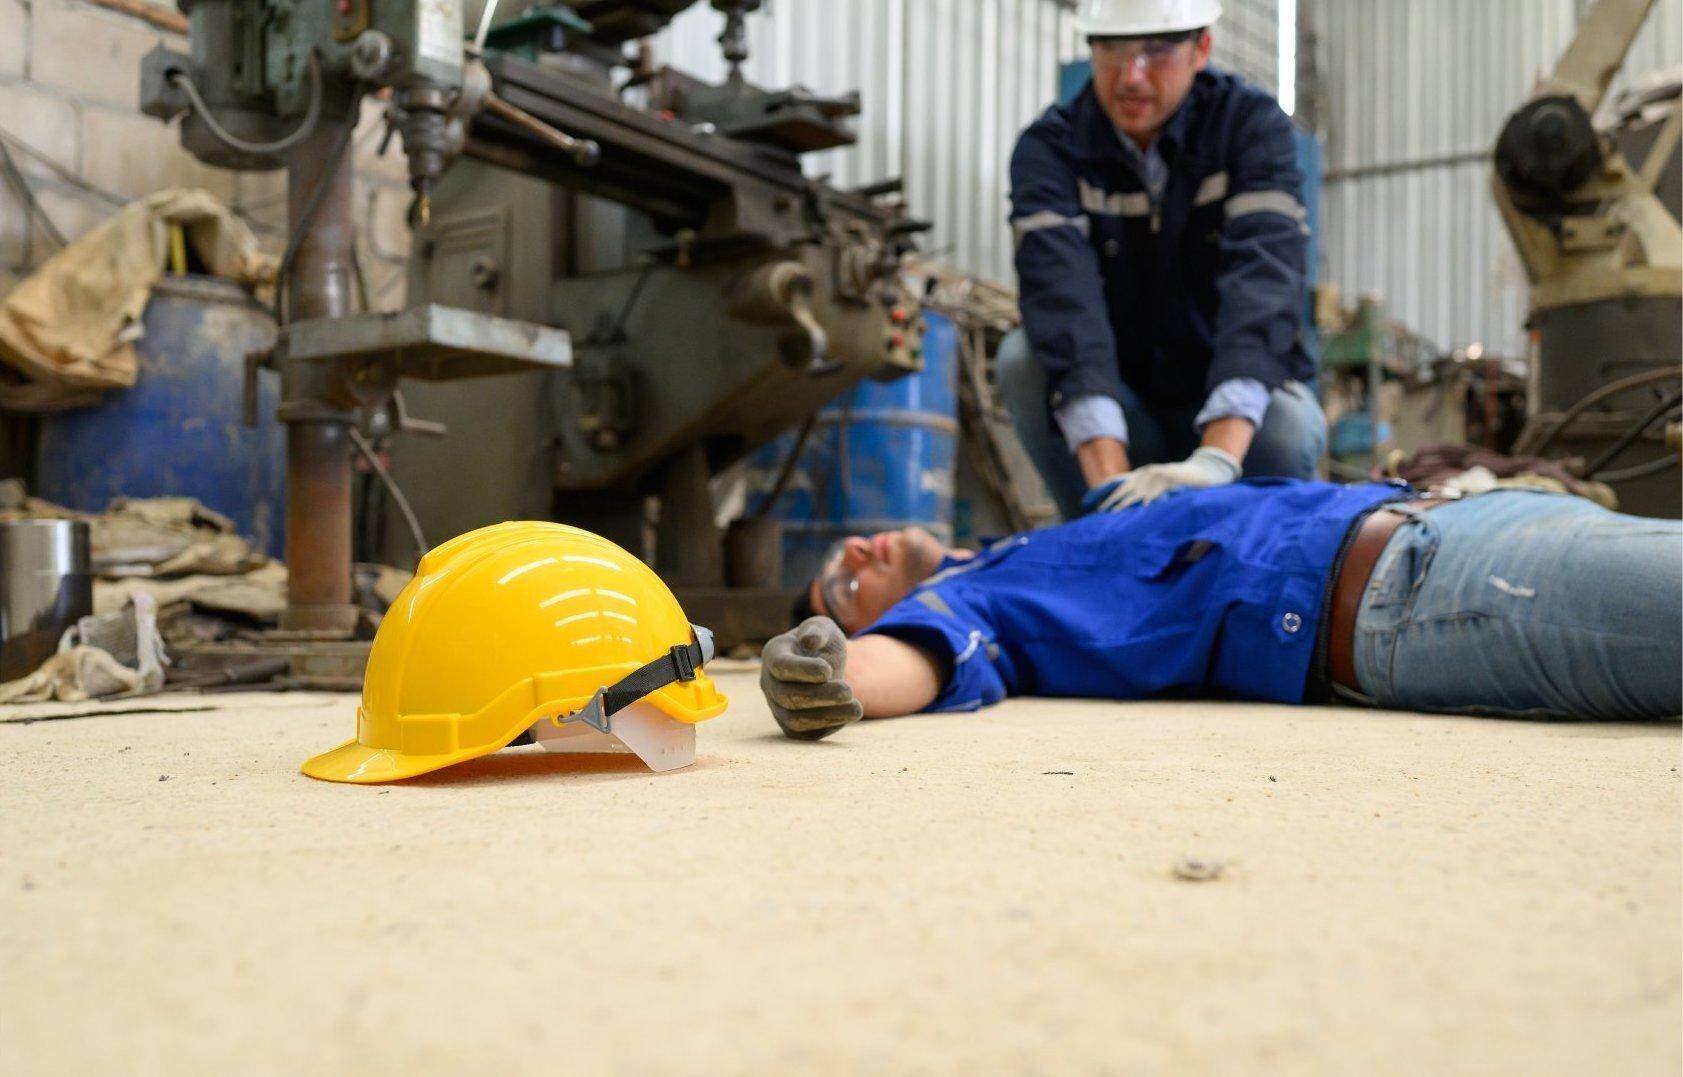 An unconscious man who has been injured on the job who will file for workers compensation in Chamblee, Georgia